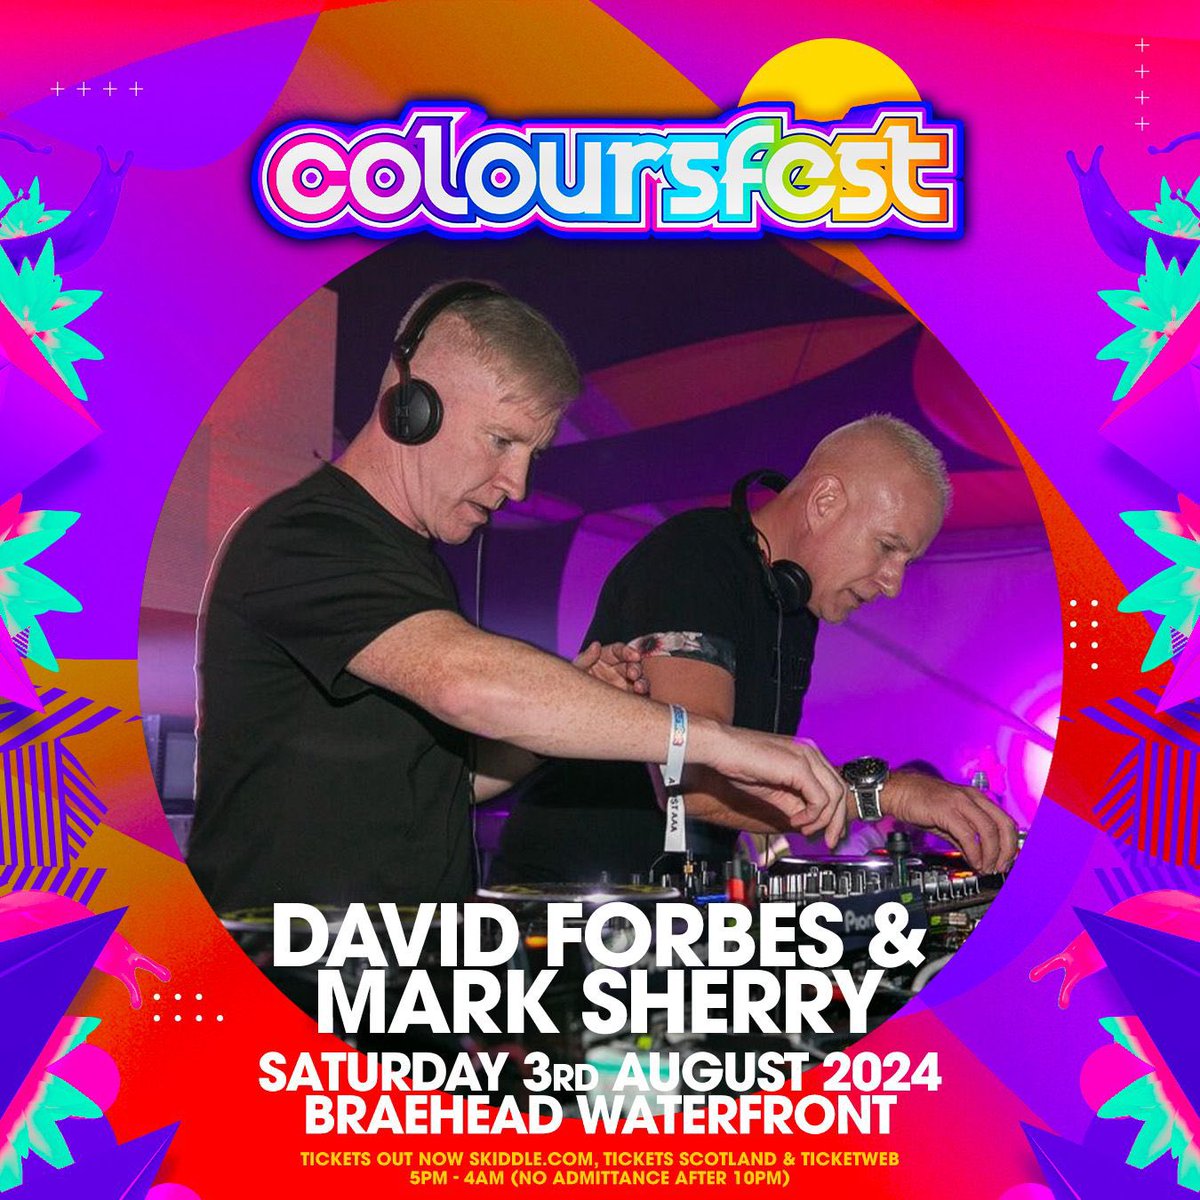 Back at Coloursfest this year for another B2B set with my partner in crime and all things TECH @djdavidforbes! See you in the Trancefest tent for the usual mayhem!! 😉 @coloursofficial